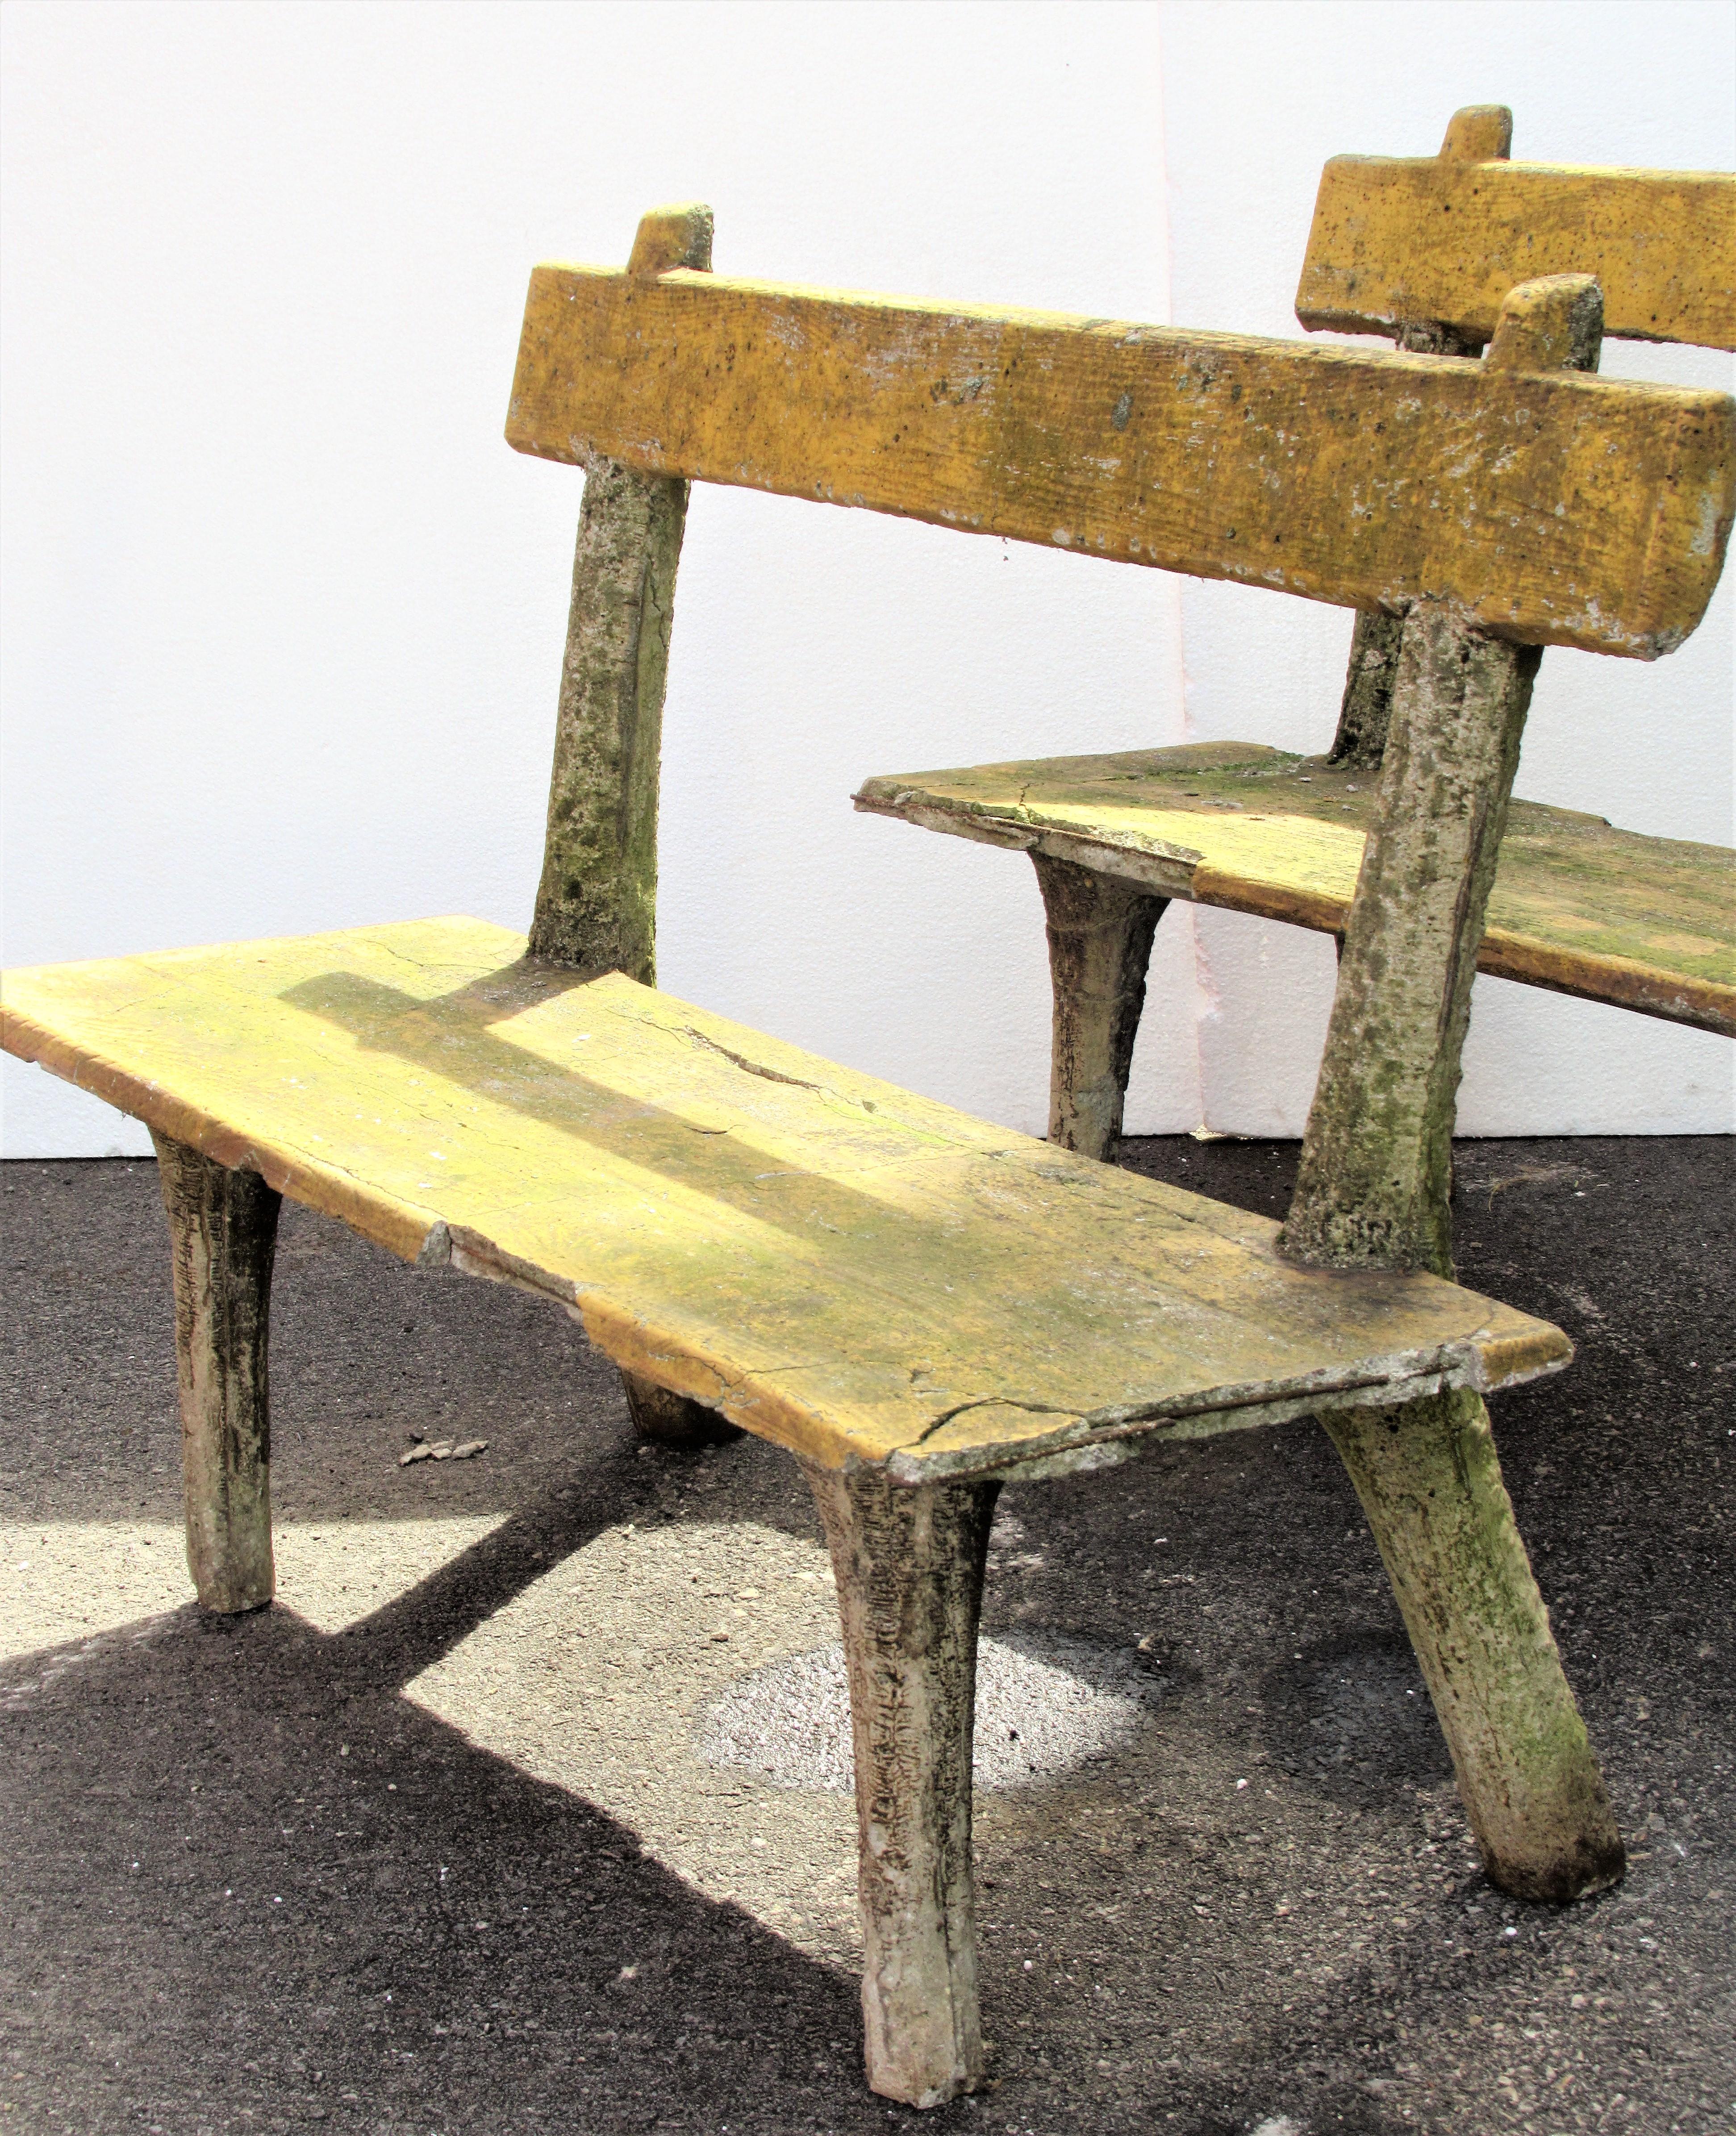 Pair of antique faux bois garden benches in all original beautifully aged weathered surface and color from many years of exposure to the elements. Continental European - France or Belgium in origin - dating from the early 1900s. Look at all pictures